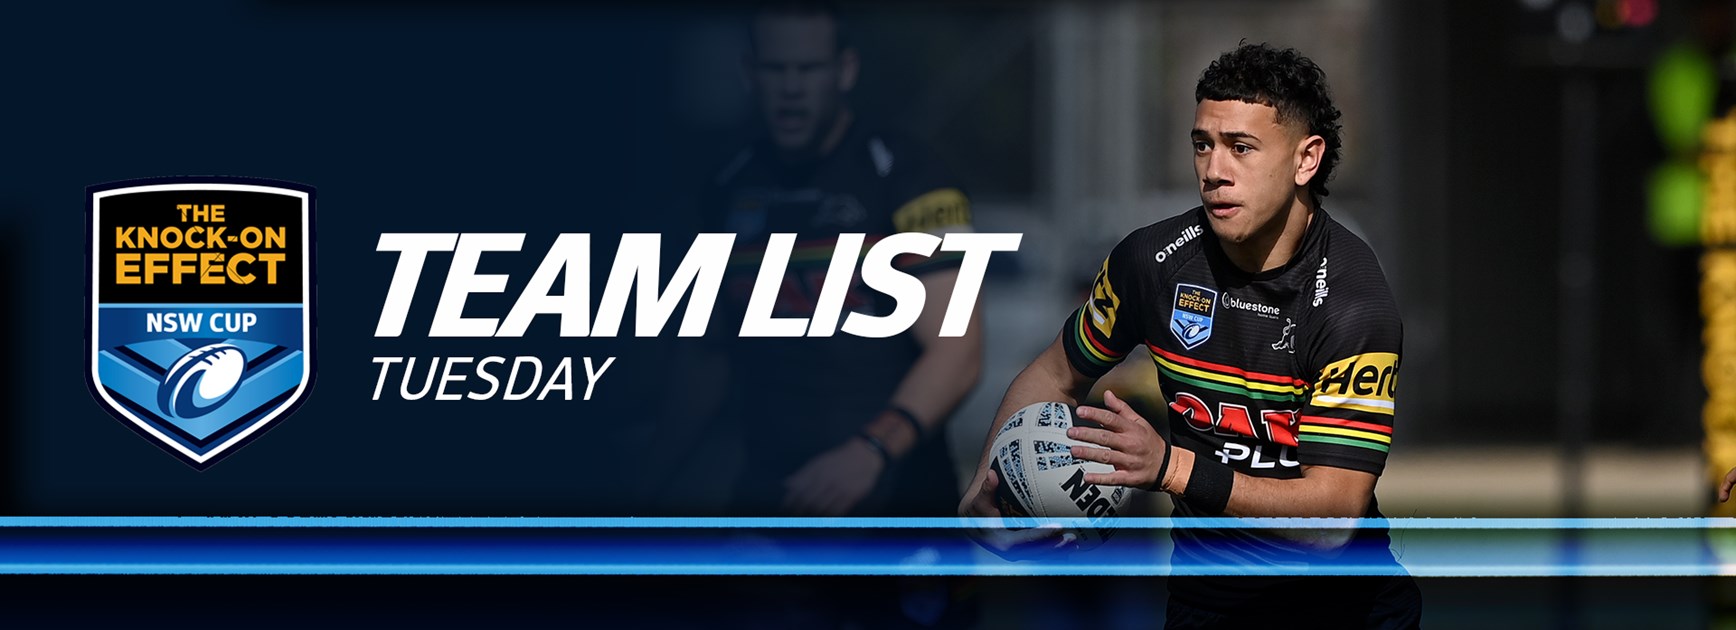 Team List Tuesday | The Knock-On Effect NSW Cup - Round 22